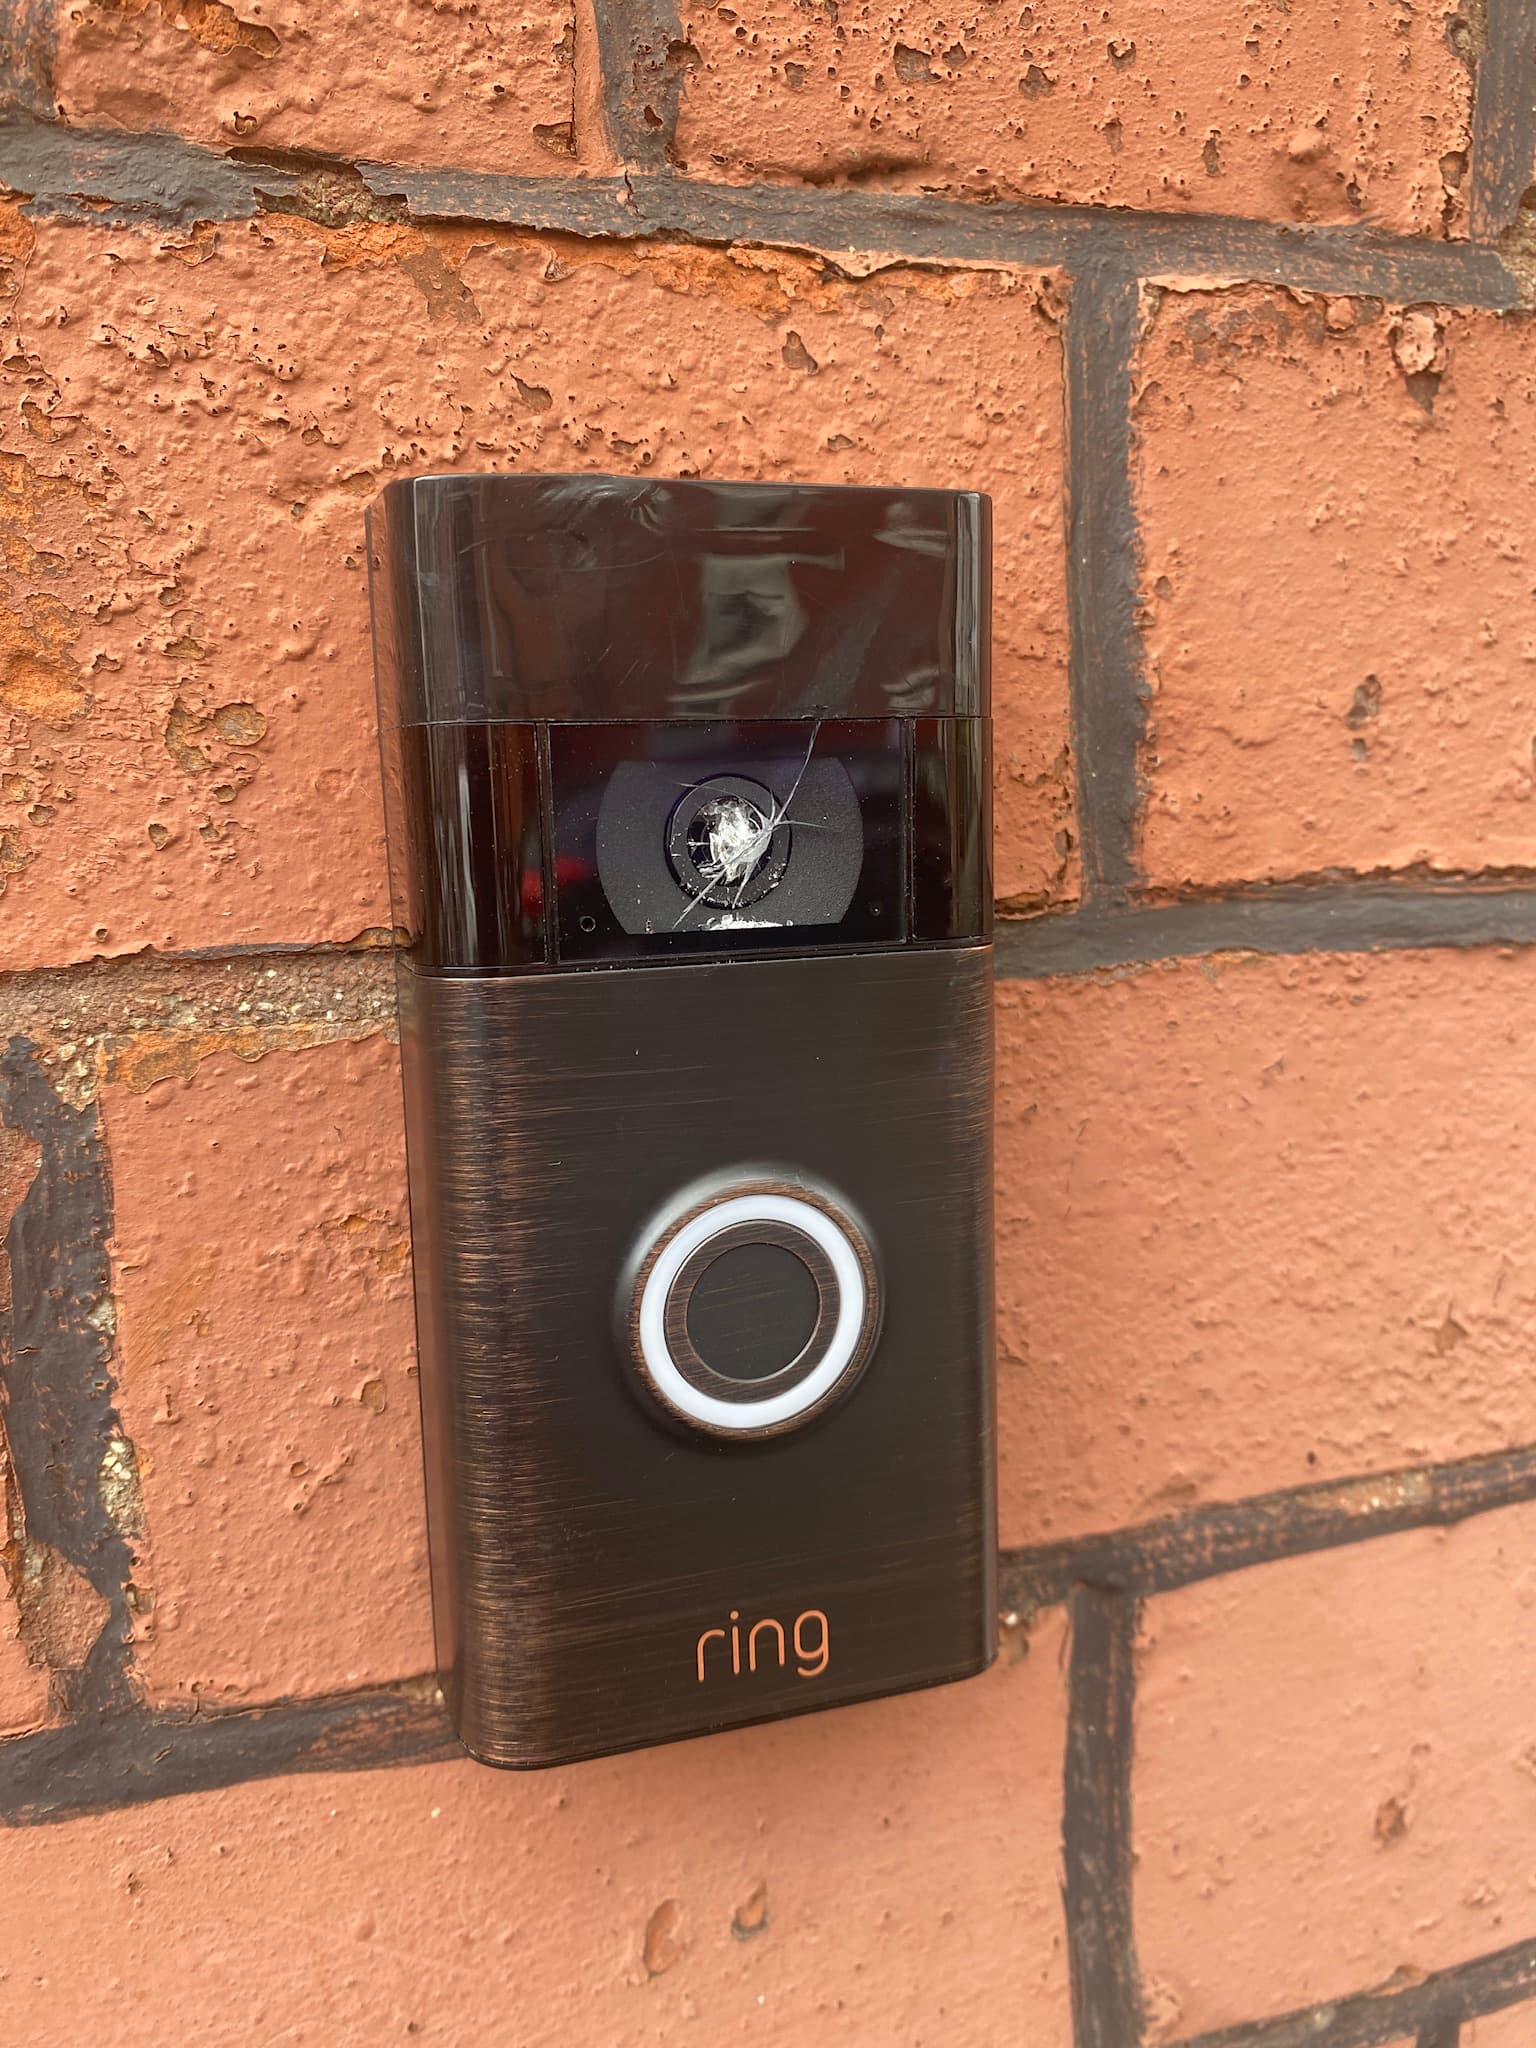 When Do You Need a Doorbell Replacement?